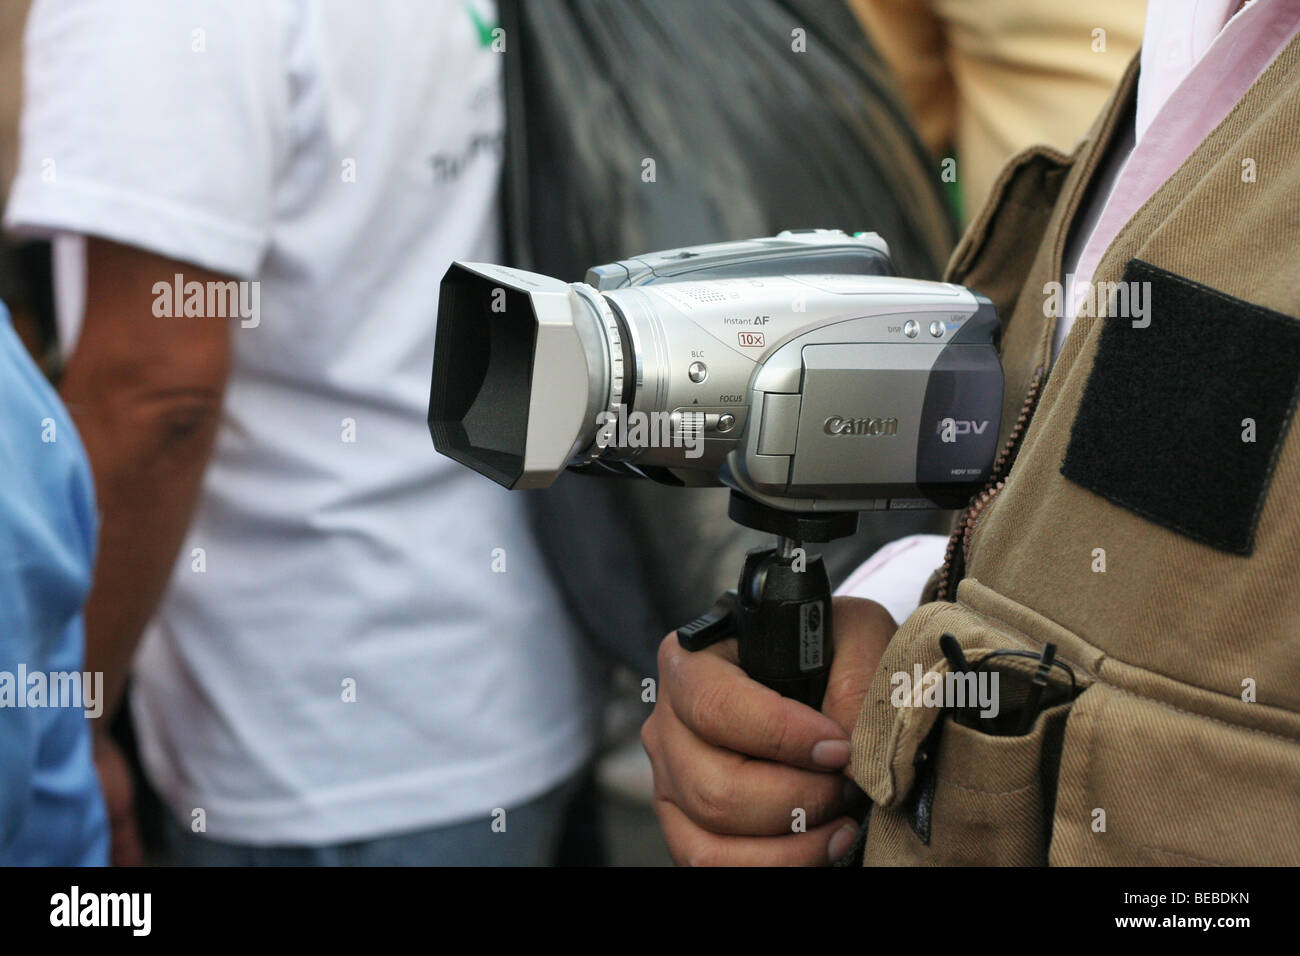 Canon hv 20 video camera used by a news reporter. Stock Photo